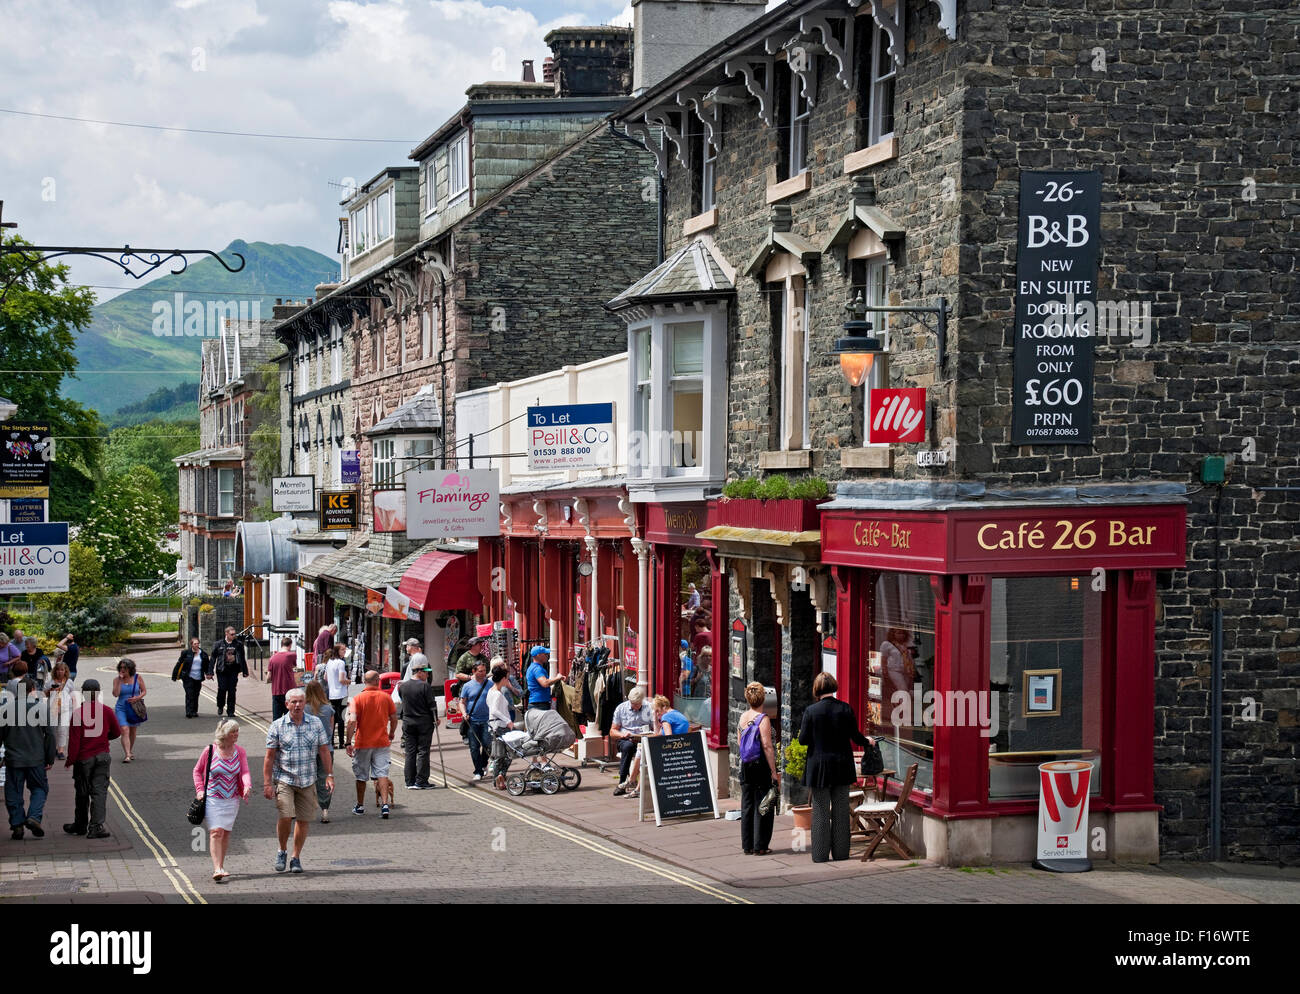 People visitors tourists walking in the street near shops stores along Lake Road in summer Keswick Cumbria England UK United Kingdom GB Great Britain Stock Photo